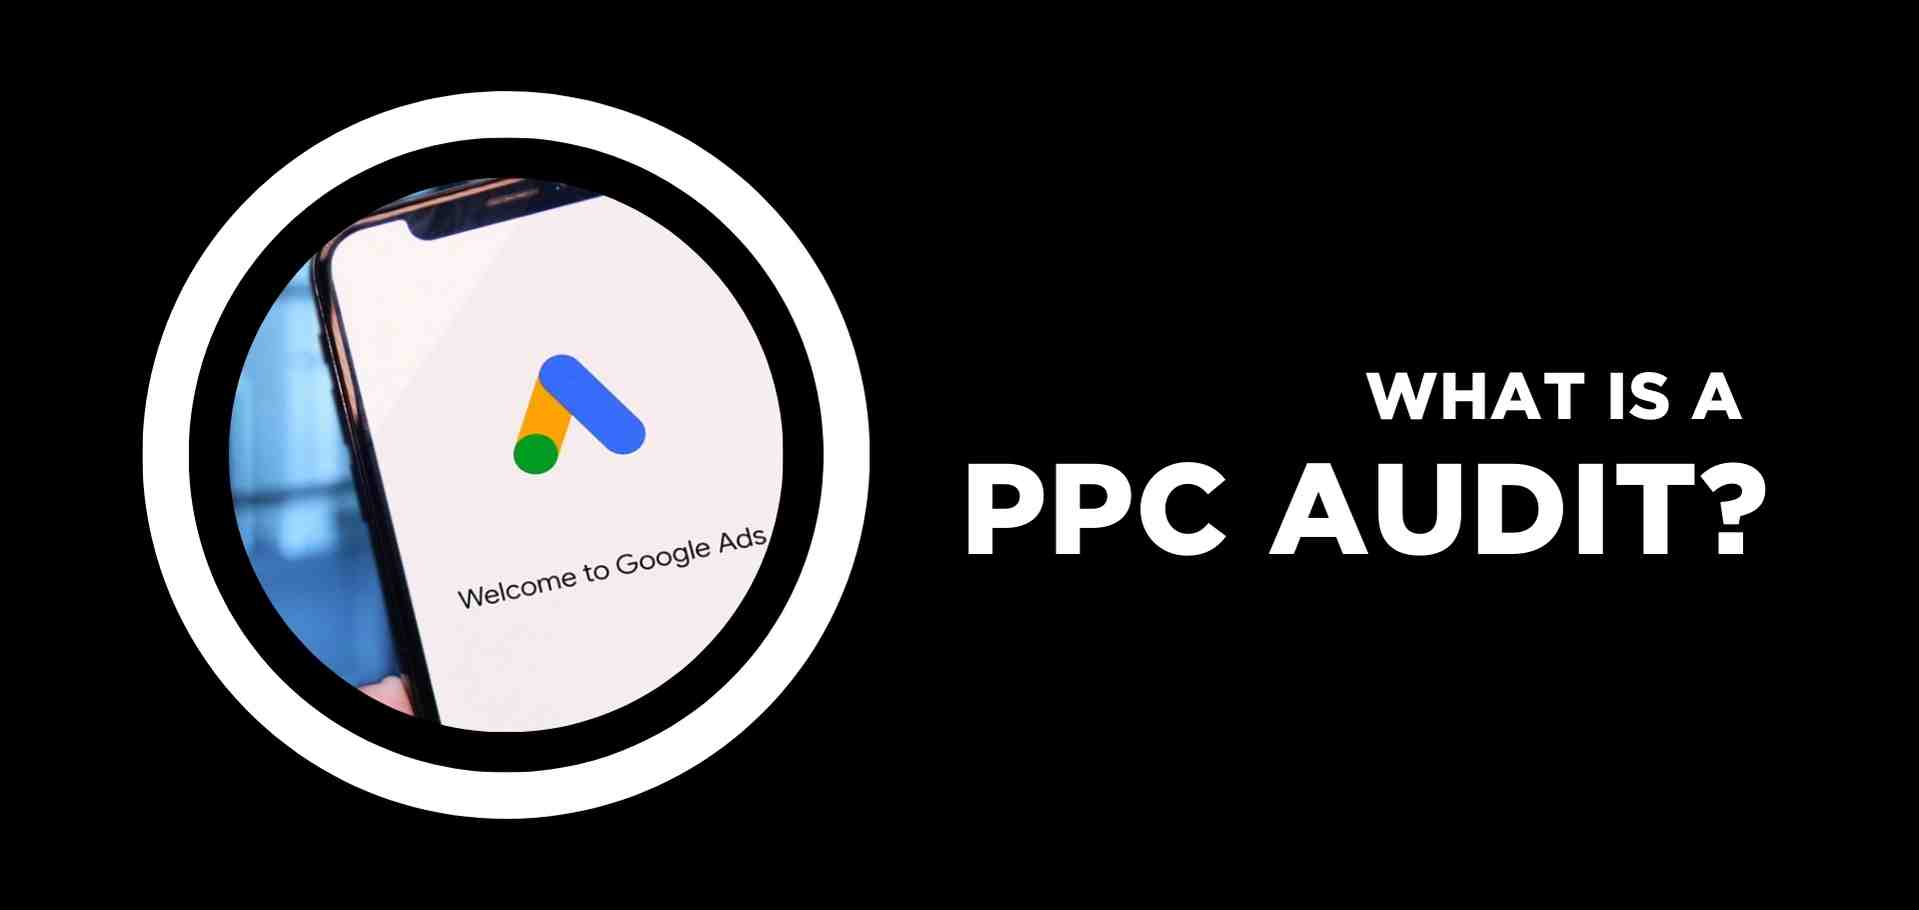 What is a PPC Audit?